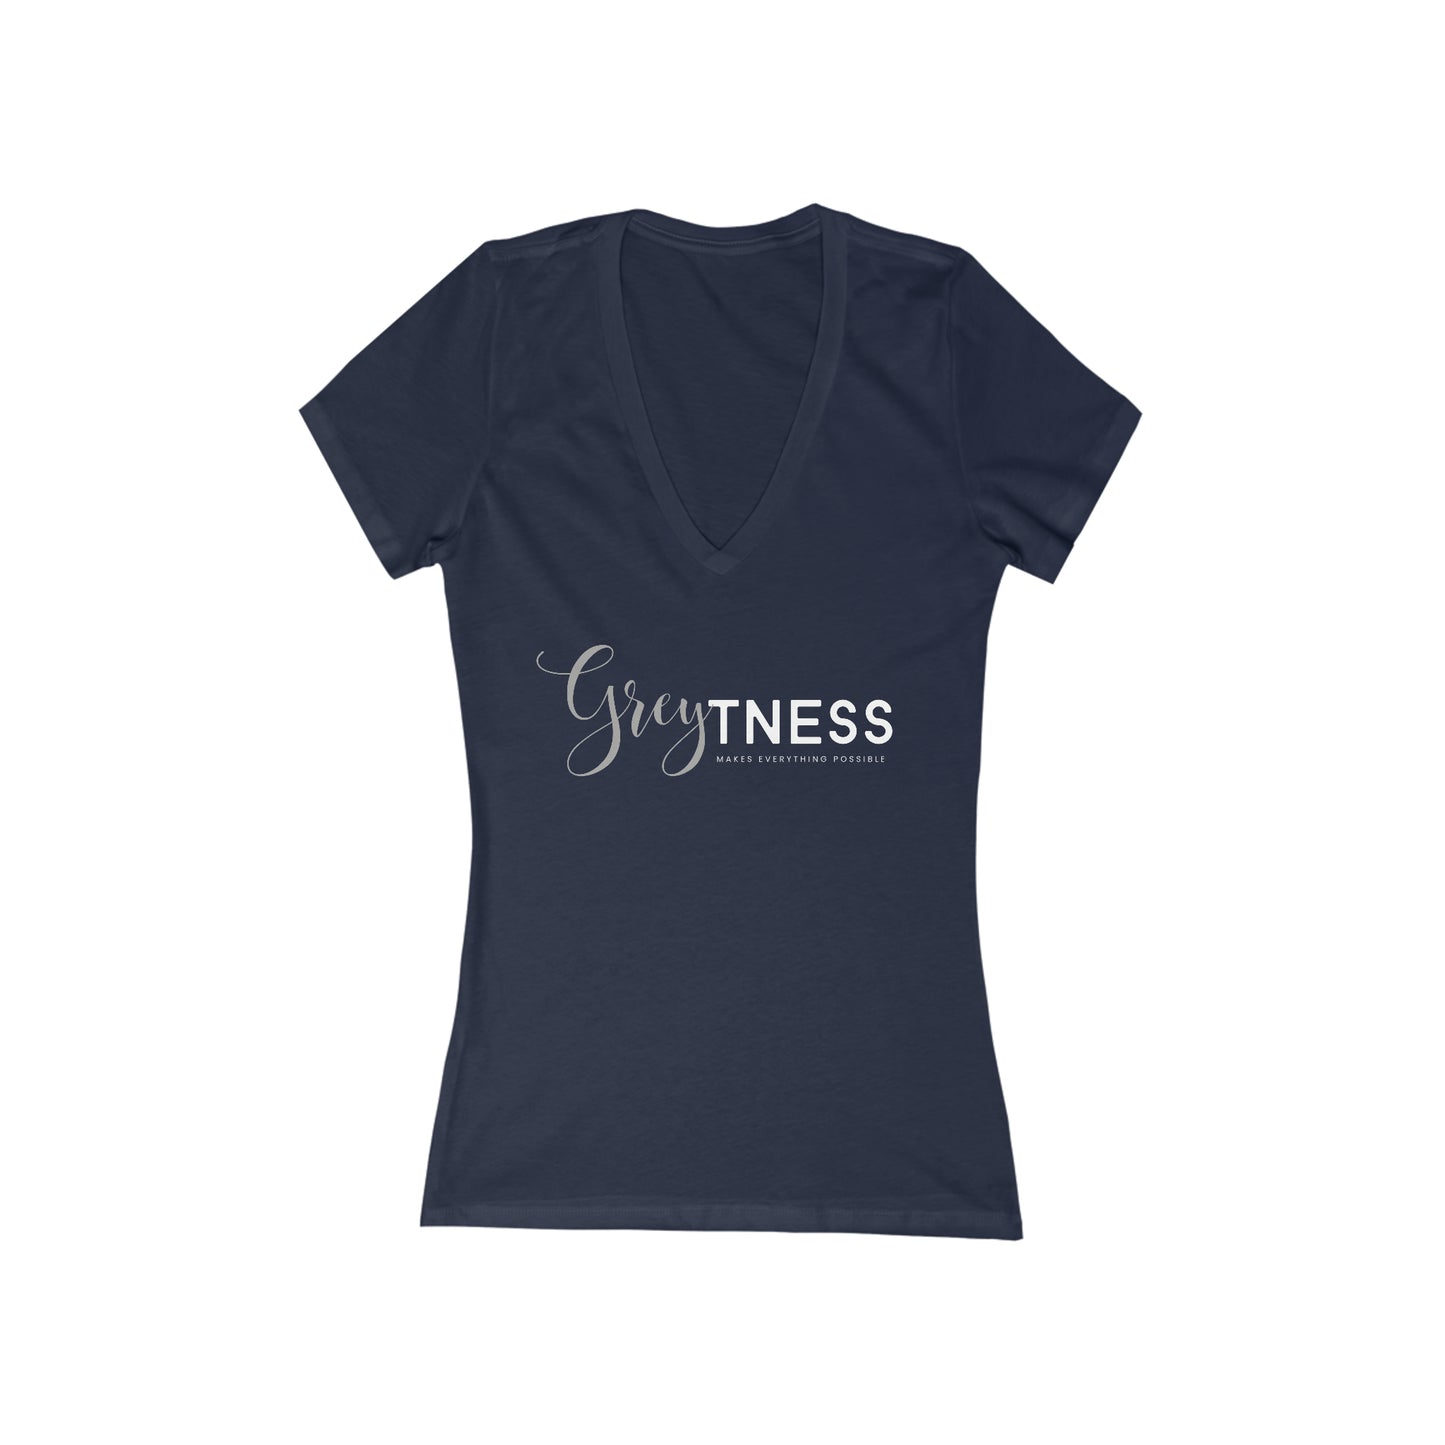 Greytness Makes Everything Possible, short sleeve deep v-neck t-shirt, for women embracing silver and gray hair